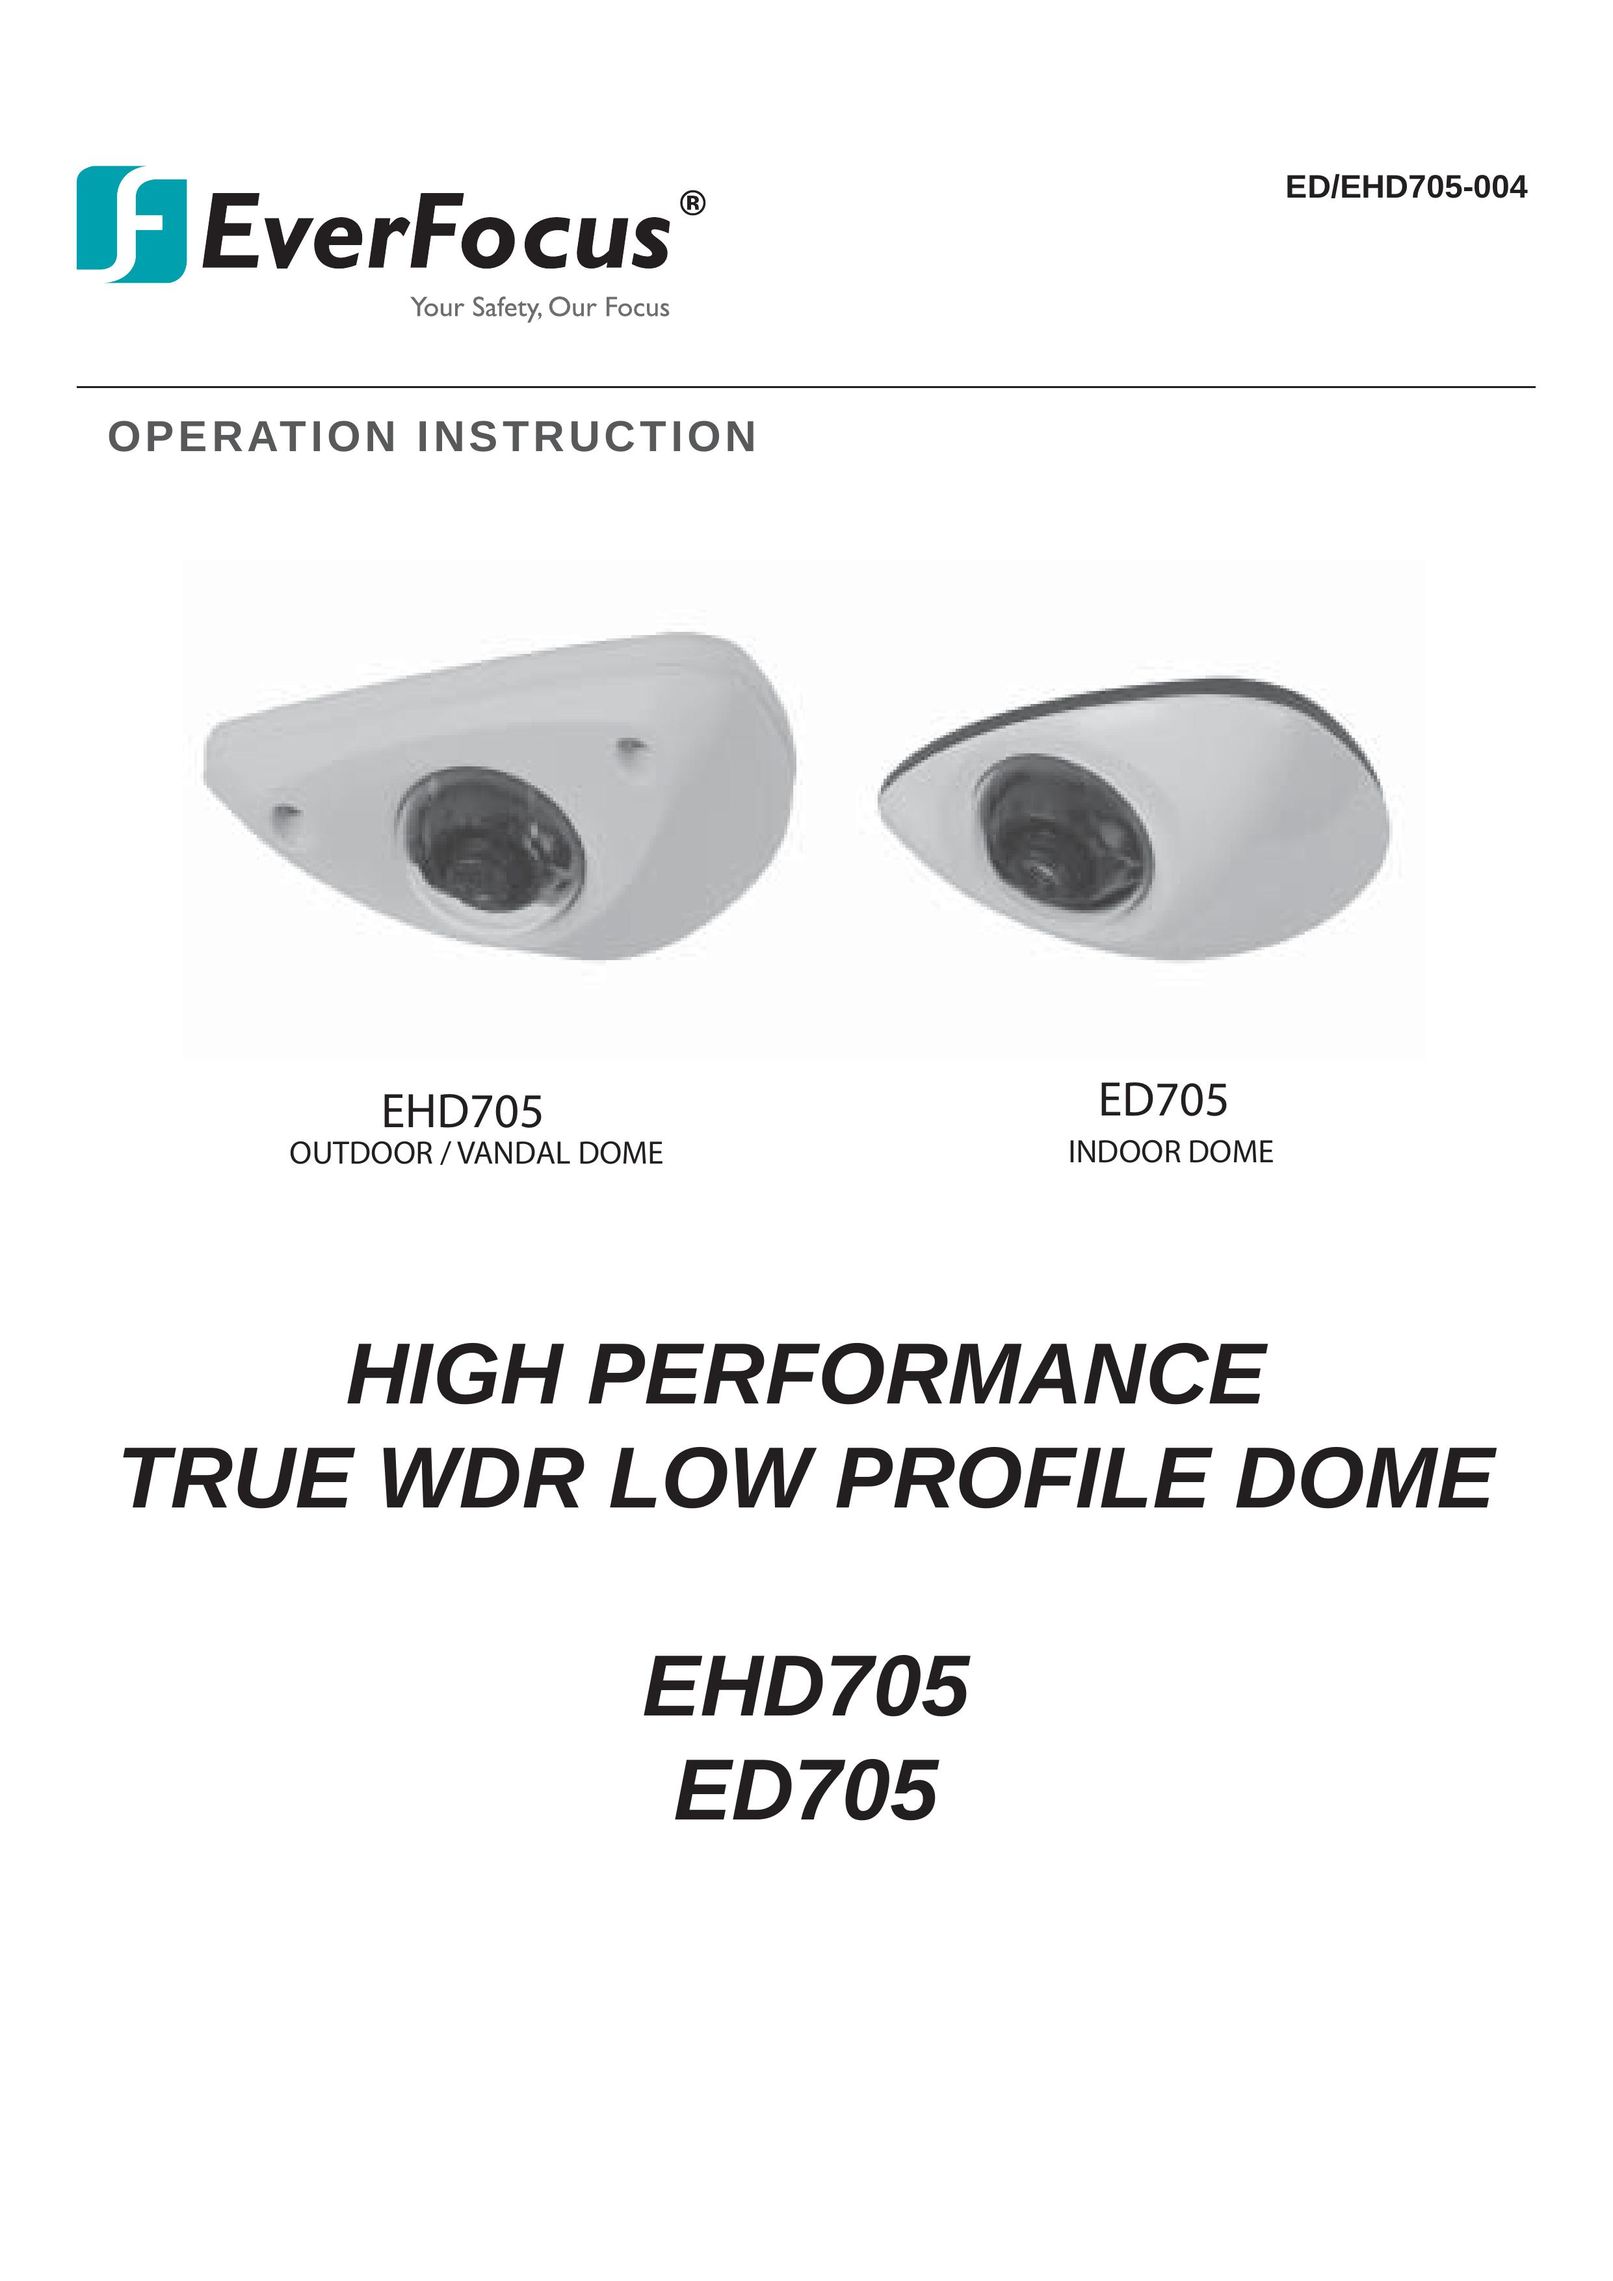 EverFocus ED705 Home Security System User Manual